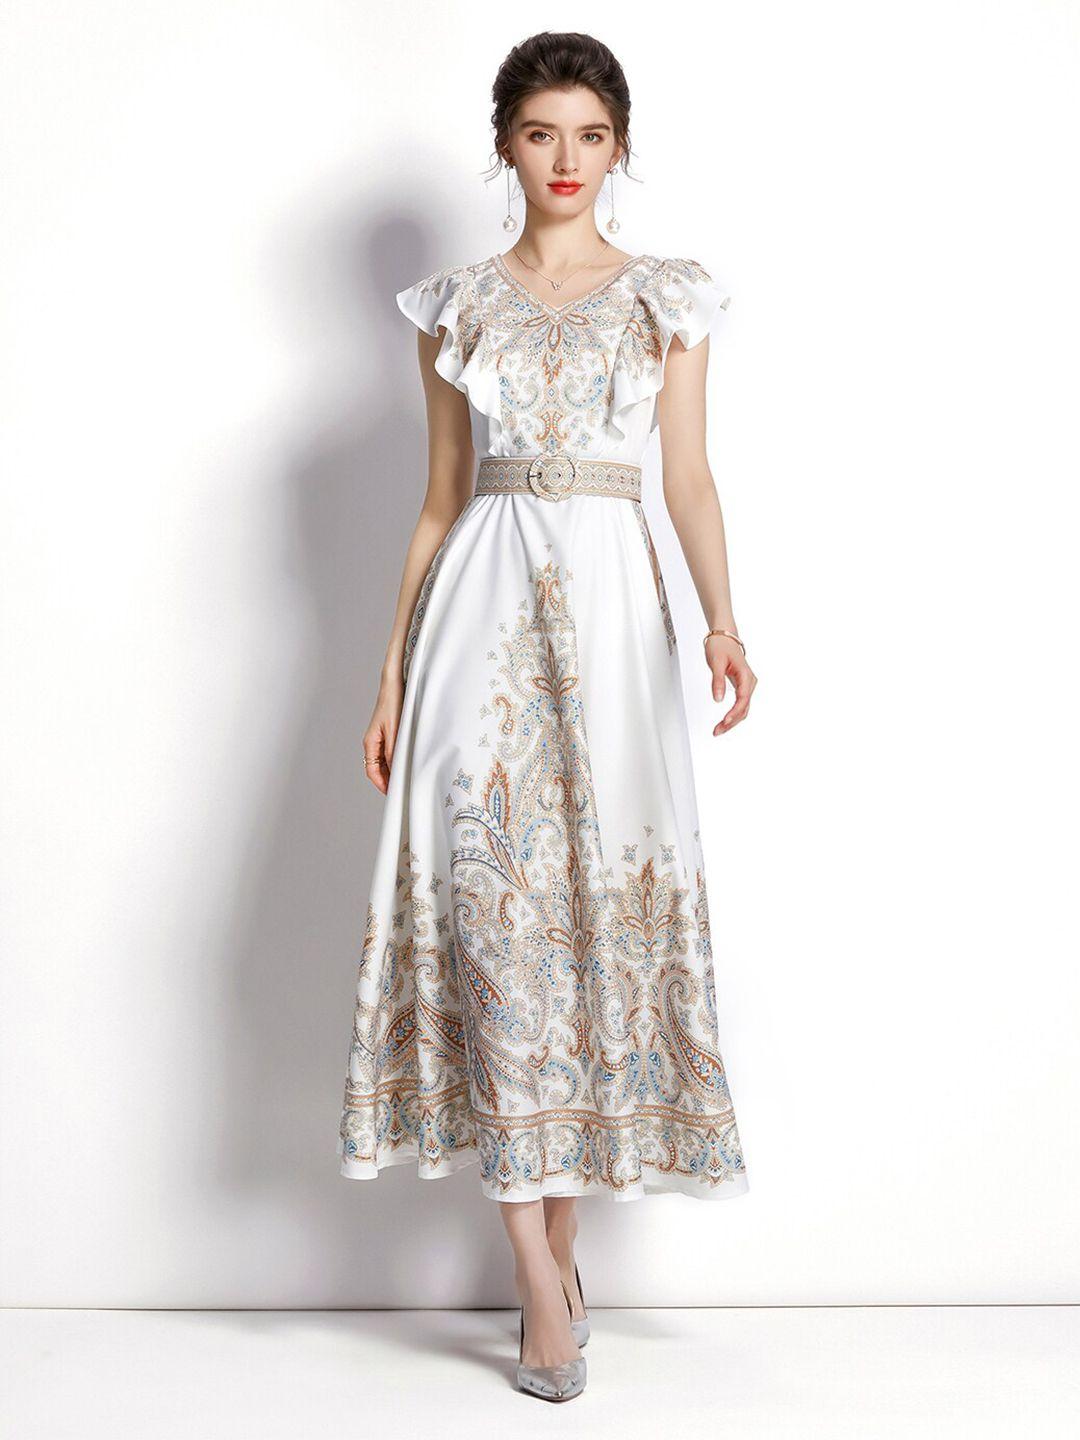 jc collection white floral maxi dress